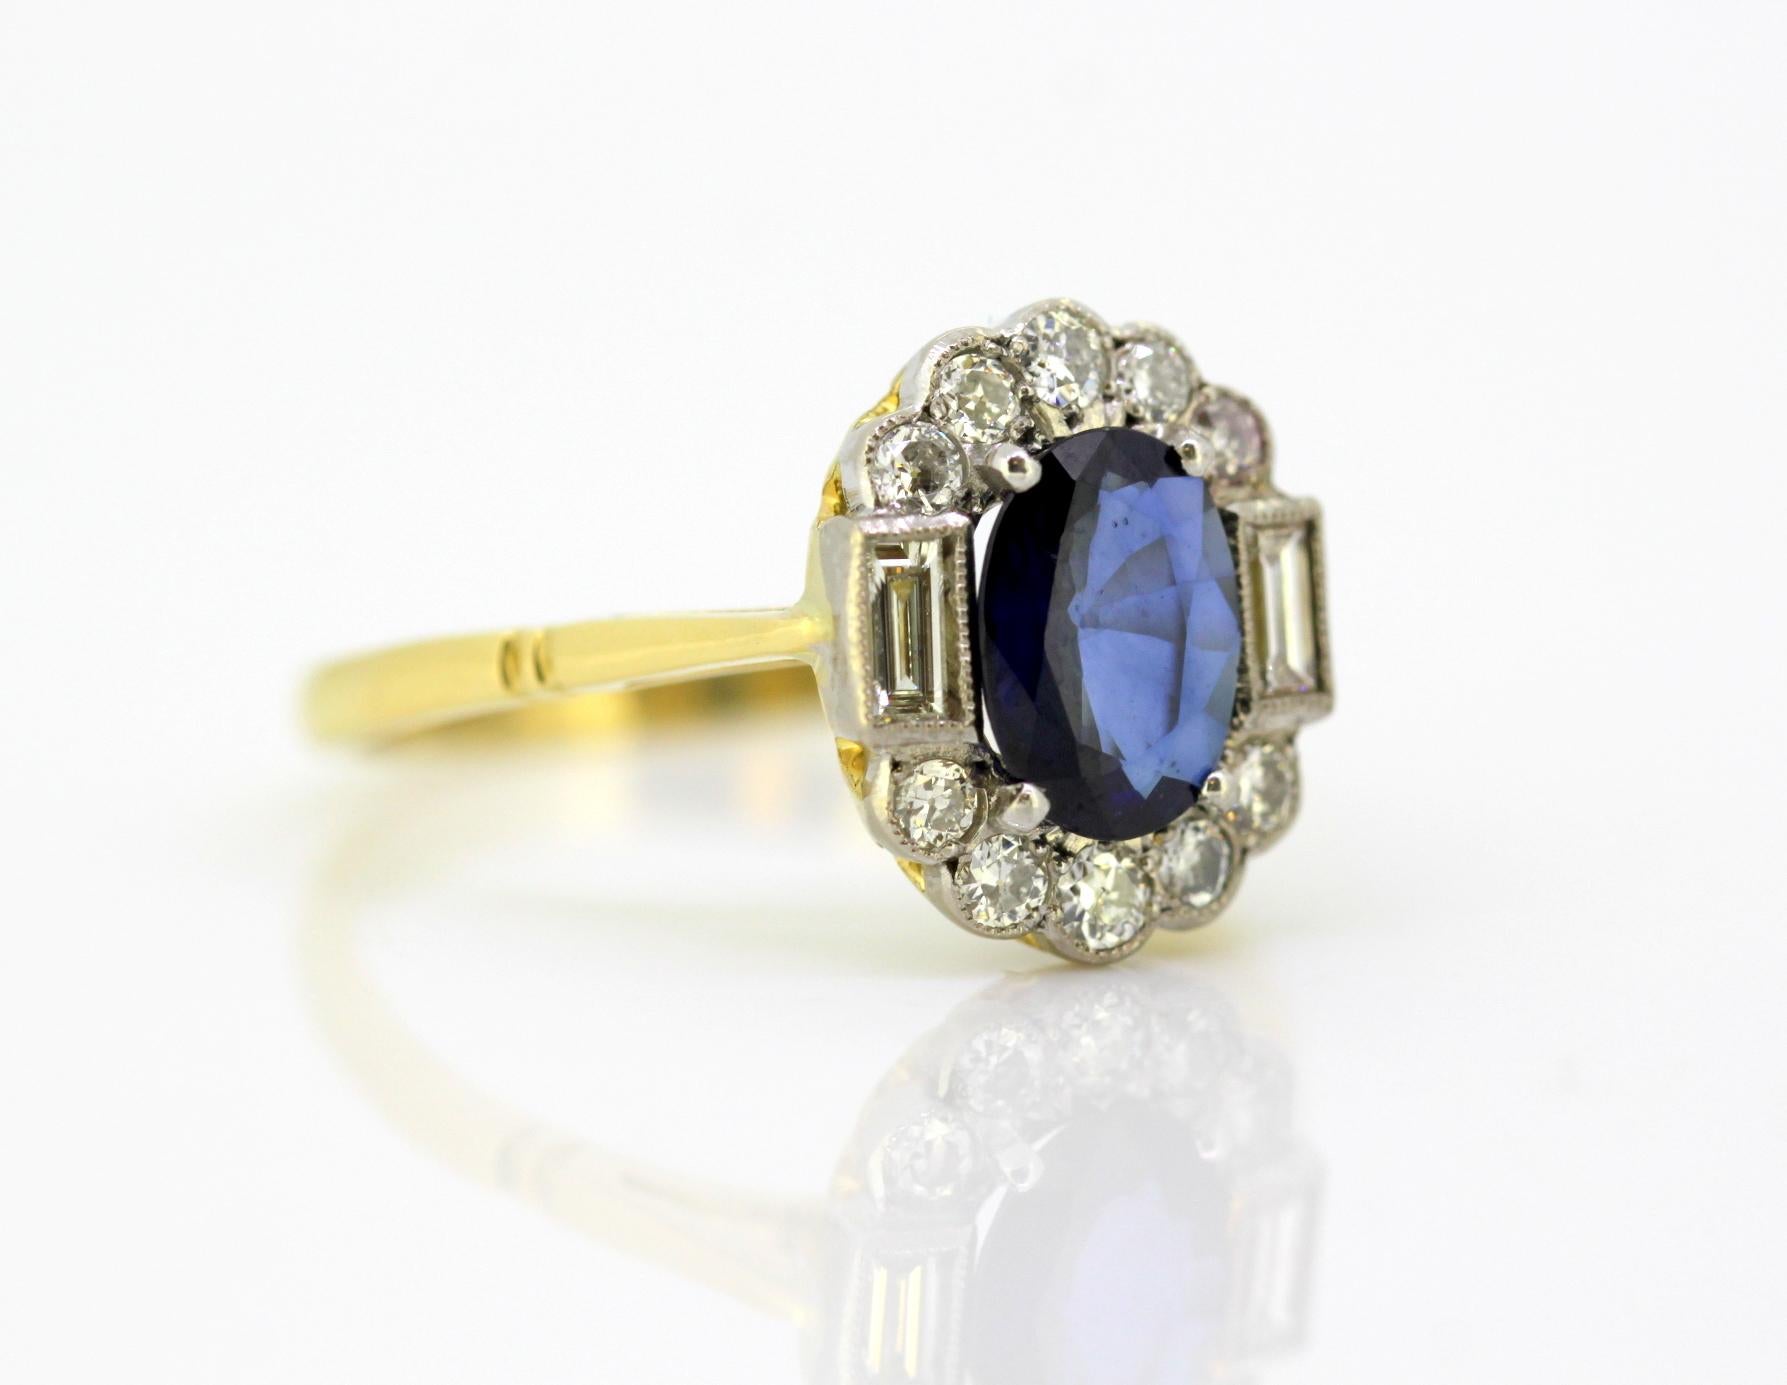 Vintage 18k yellow gold ladies ring with blue sapphire and diamonds
Circa 1970's
Hallmarked 18K

Dimensions -
Circa 1970's
Size : 2.5 x 2.2 x 1.3 cm
Weight: 4 grams total

Blue Sapphire -
Cut : oval
Size : 1.5 CT
Treatment : Natural

Diamonds - 
Cut